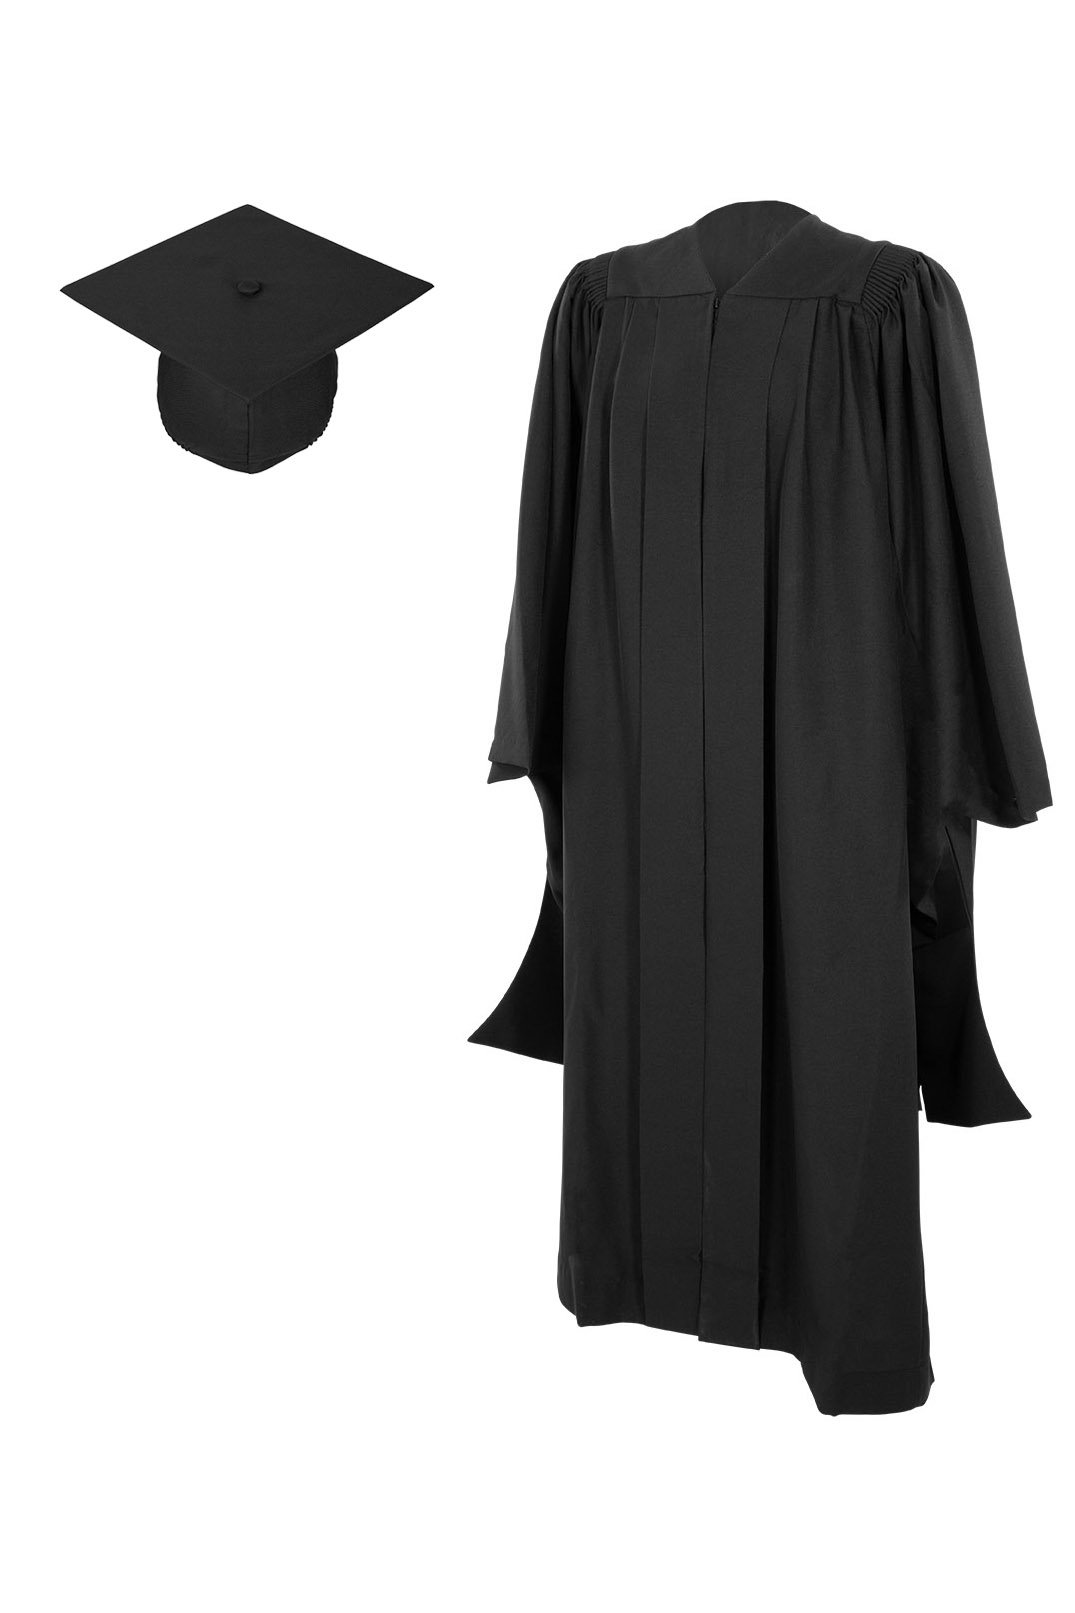 Graduation Gowns, Robe Buy Online at Best Prices in India | Flipkart.com